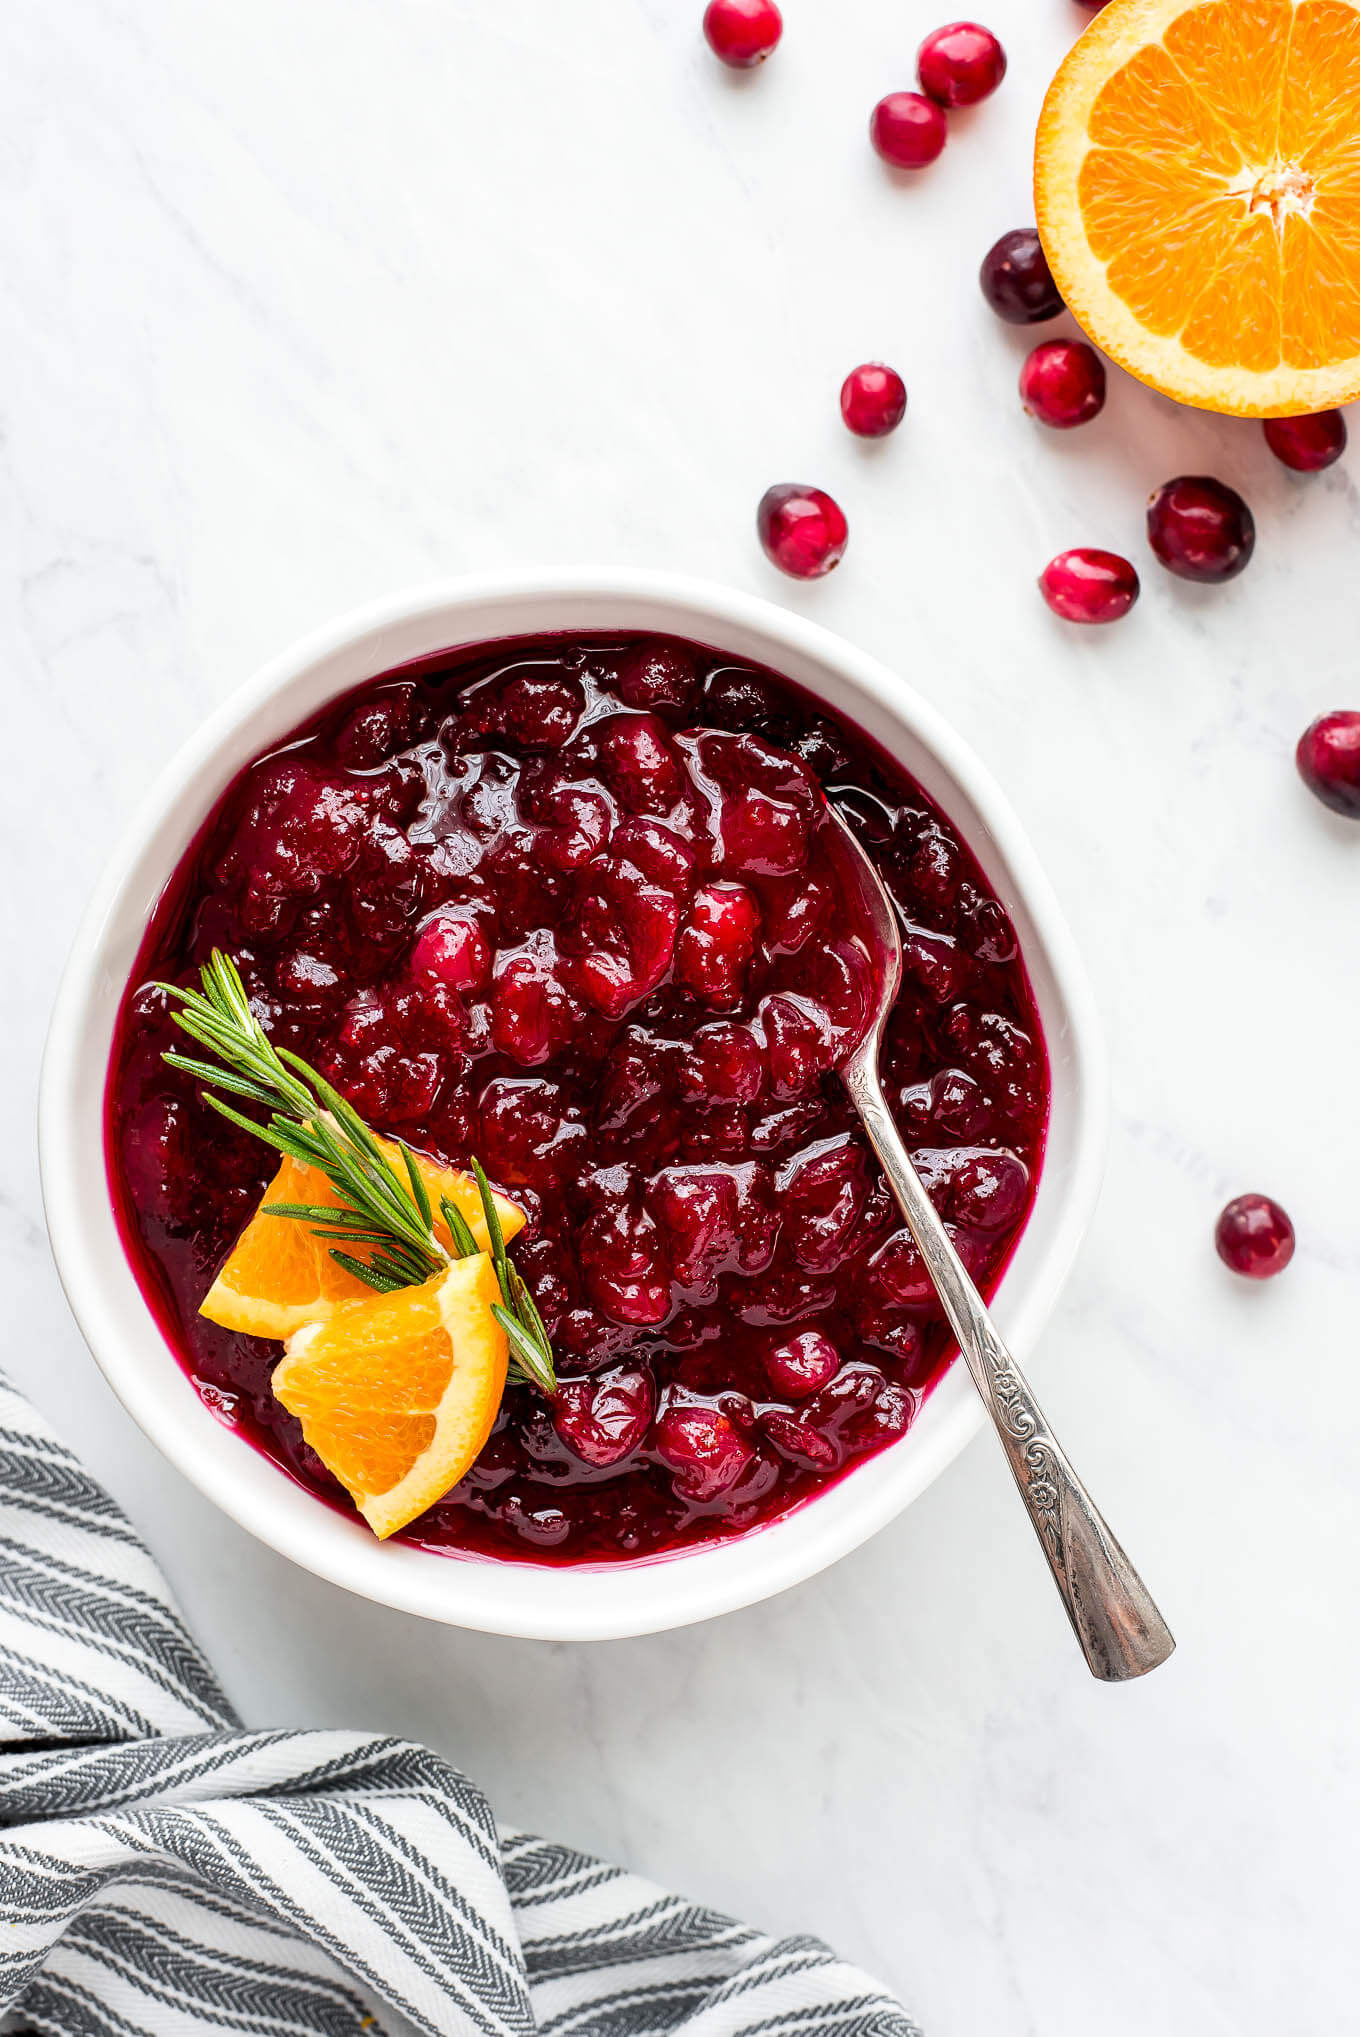 Cranberry relish in a bowl garnished with orange slices and rosemary.